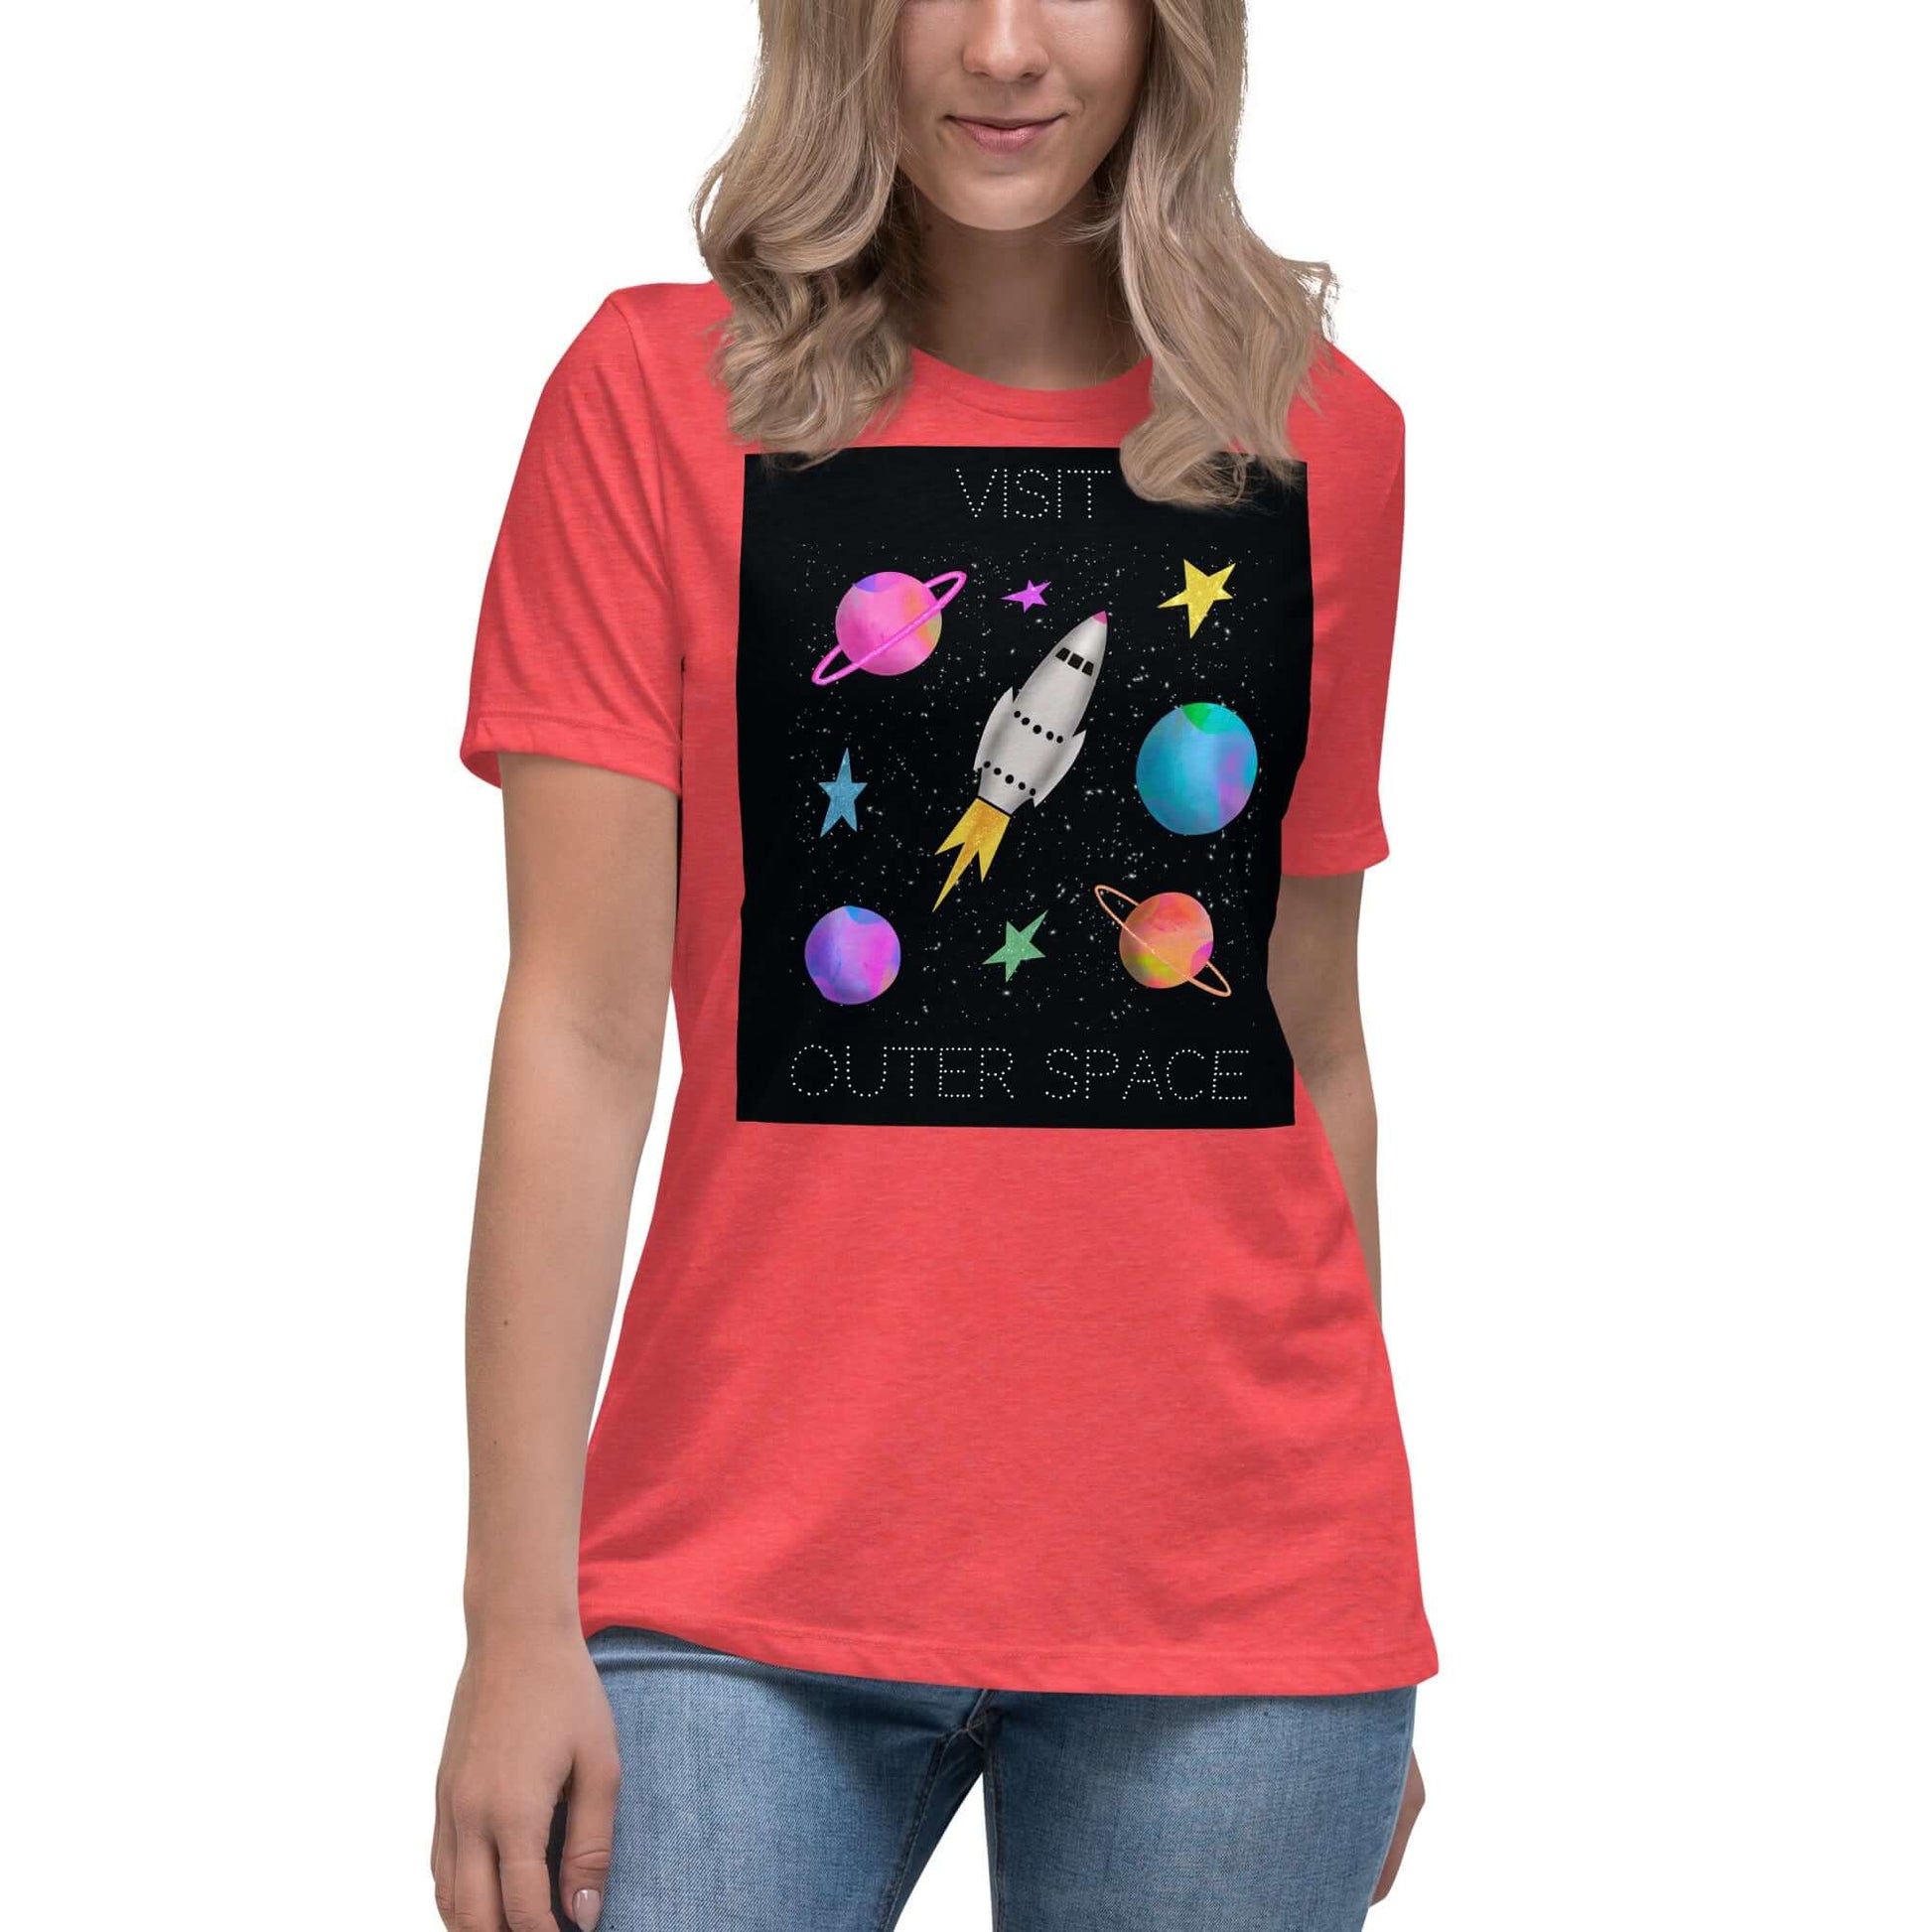 Whimsical Space Rocket with Colorful Planets and Stars on Black Background with Text “Visit Outer Space” Women’s Short Sleeve Tee in Heather Red